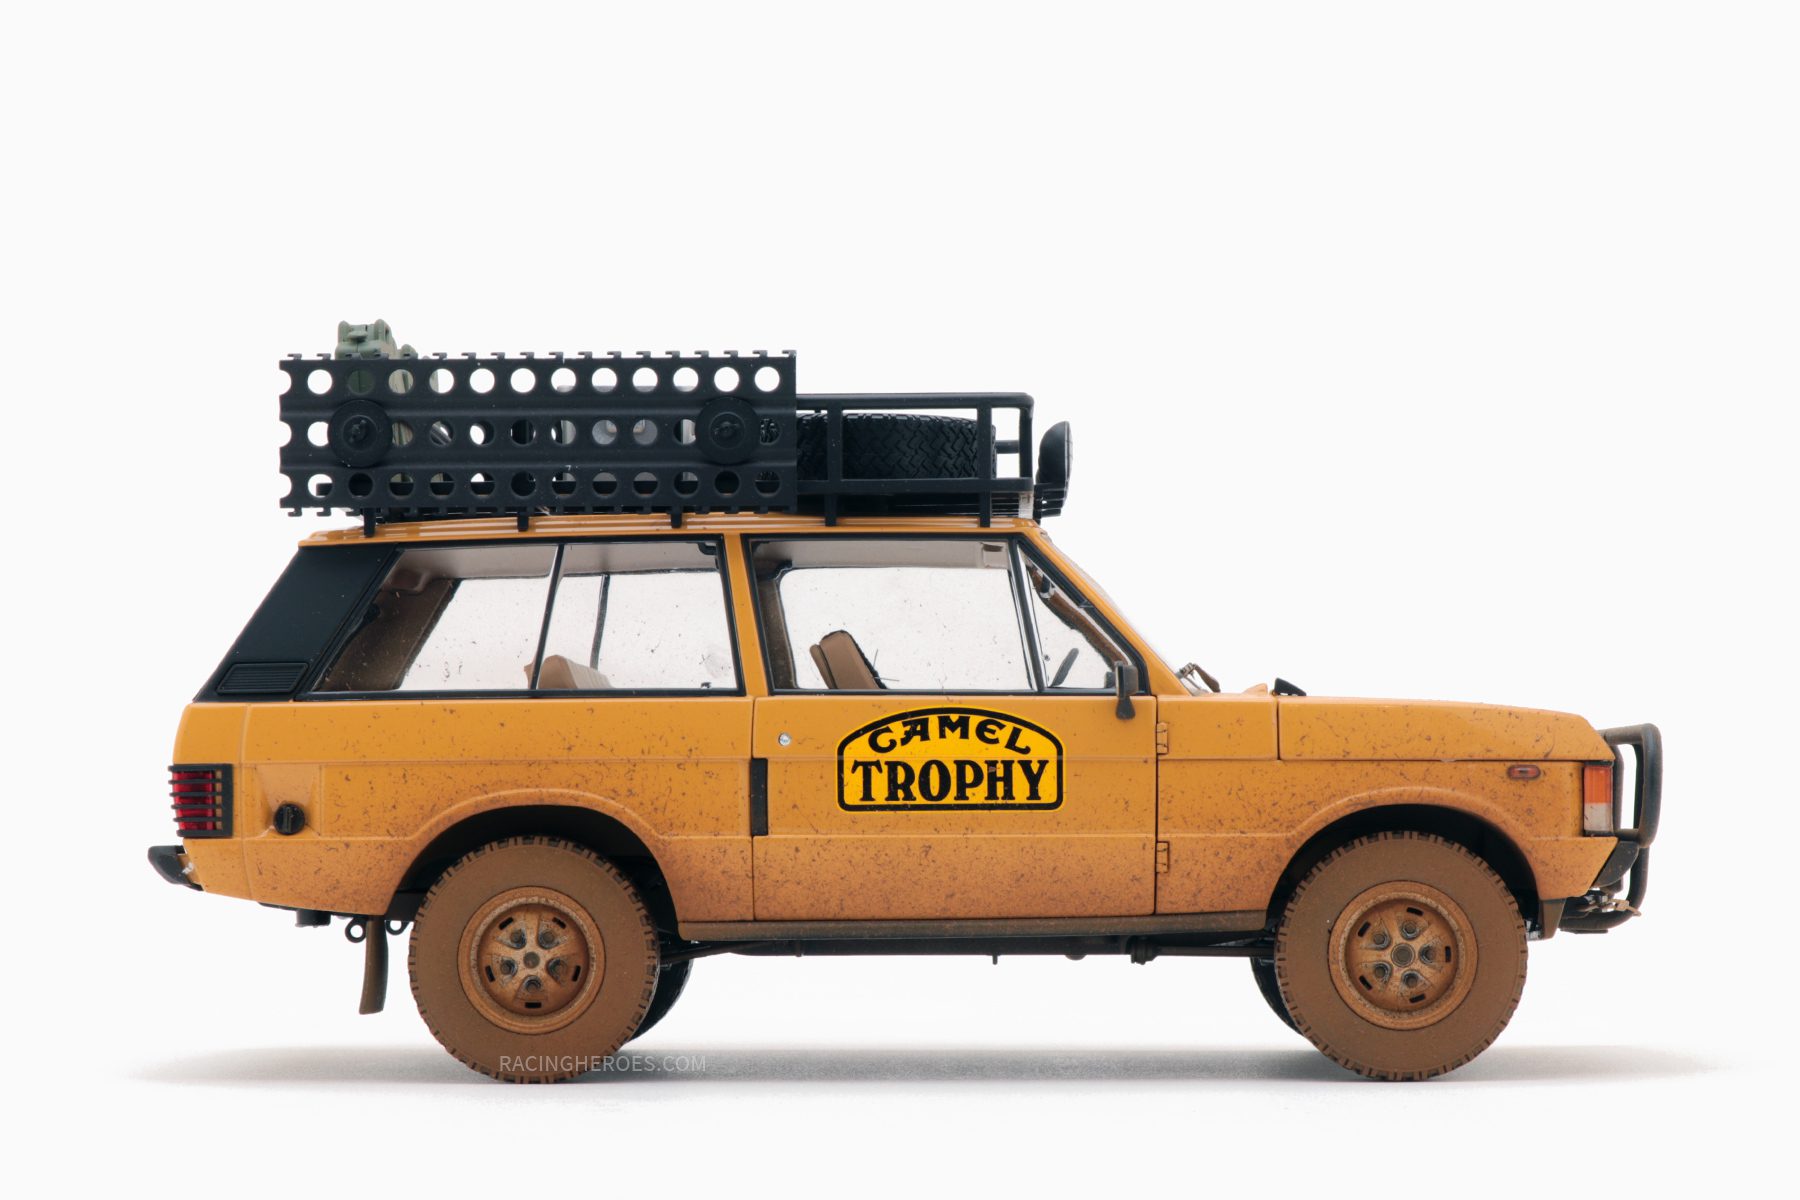 Range Rover “Camel Trophy” Papua New Guinea 1982 Dirty 1:18